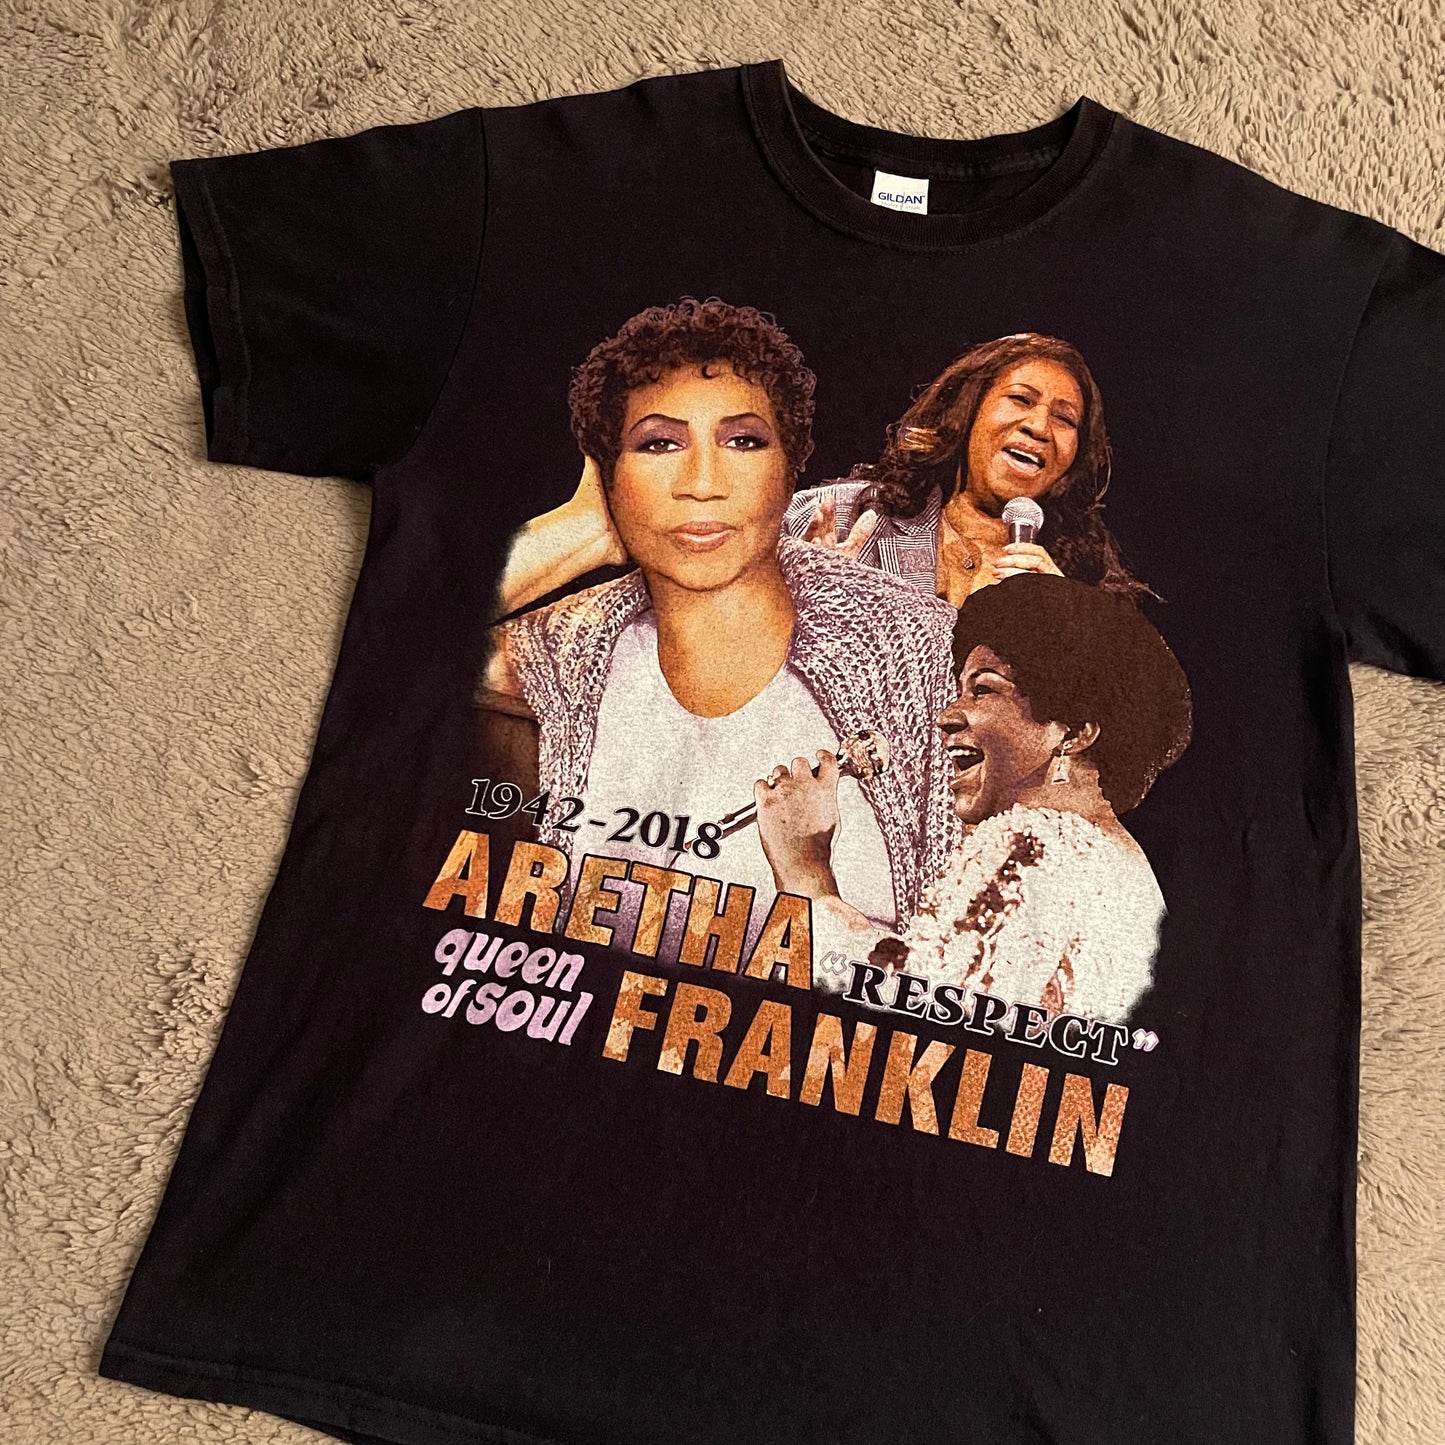 Aretha Franklin "Queen of Soul" Tee (M)